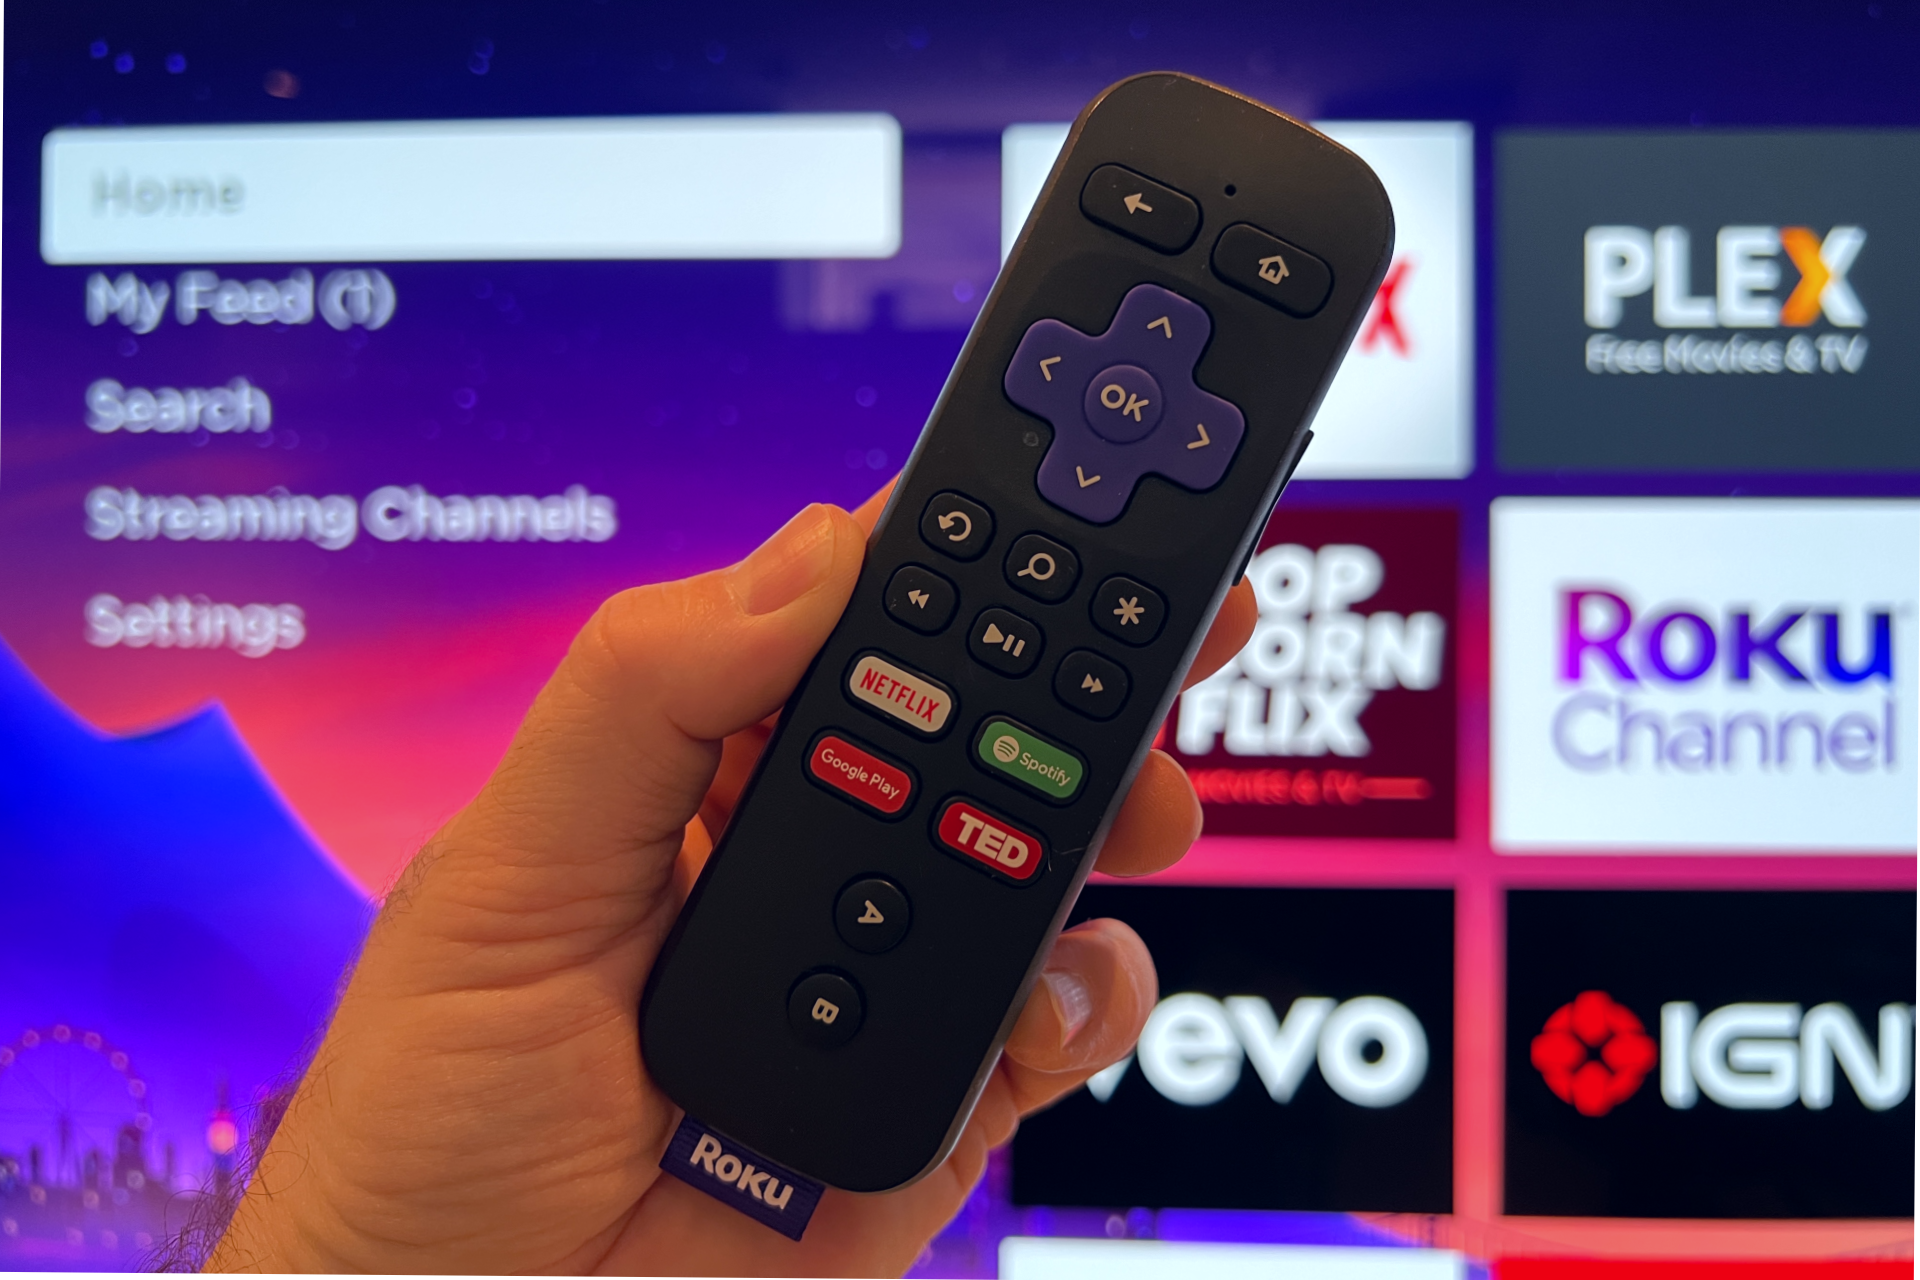 I tried Roku's new line of low-cost smart home products. There's only one  minor drawback